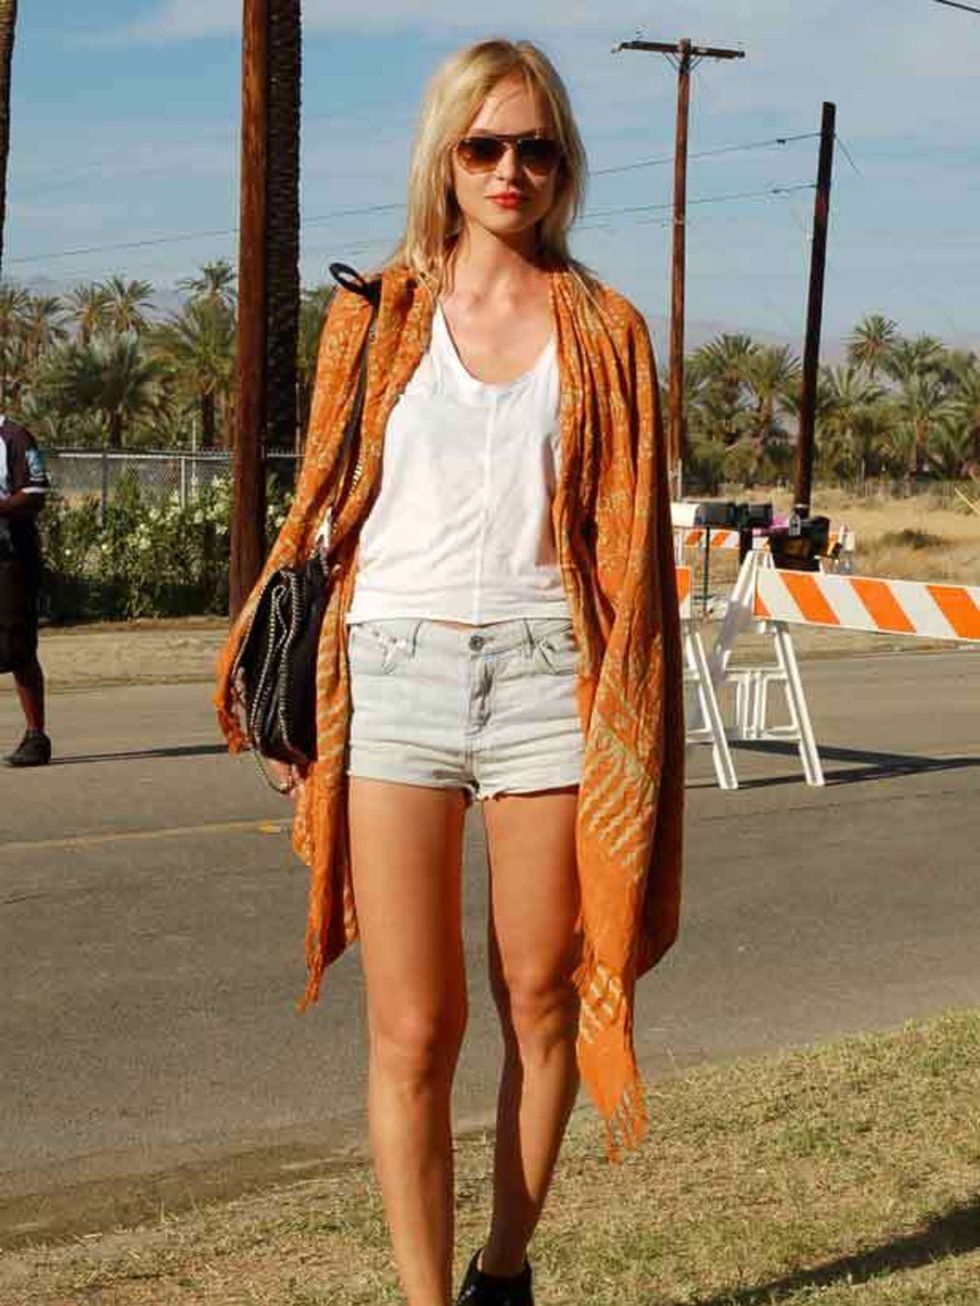 <p>Photo by Anne Zeigler.Victoria, 23. Cos top, Topshop shorts, DKNY bag.</p>